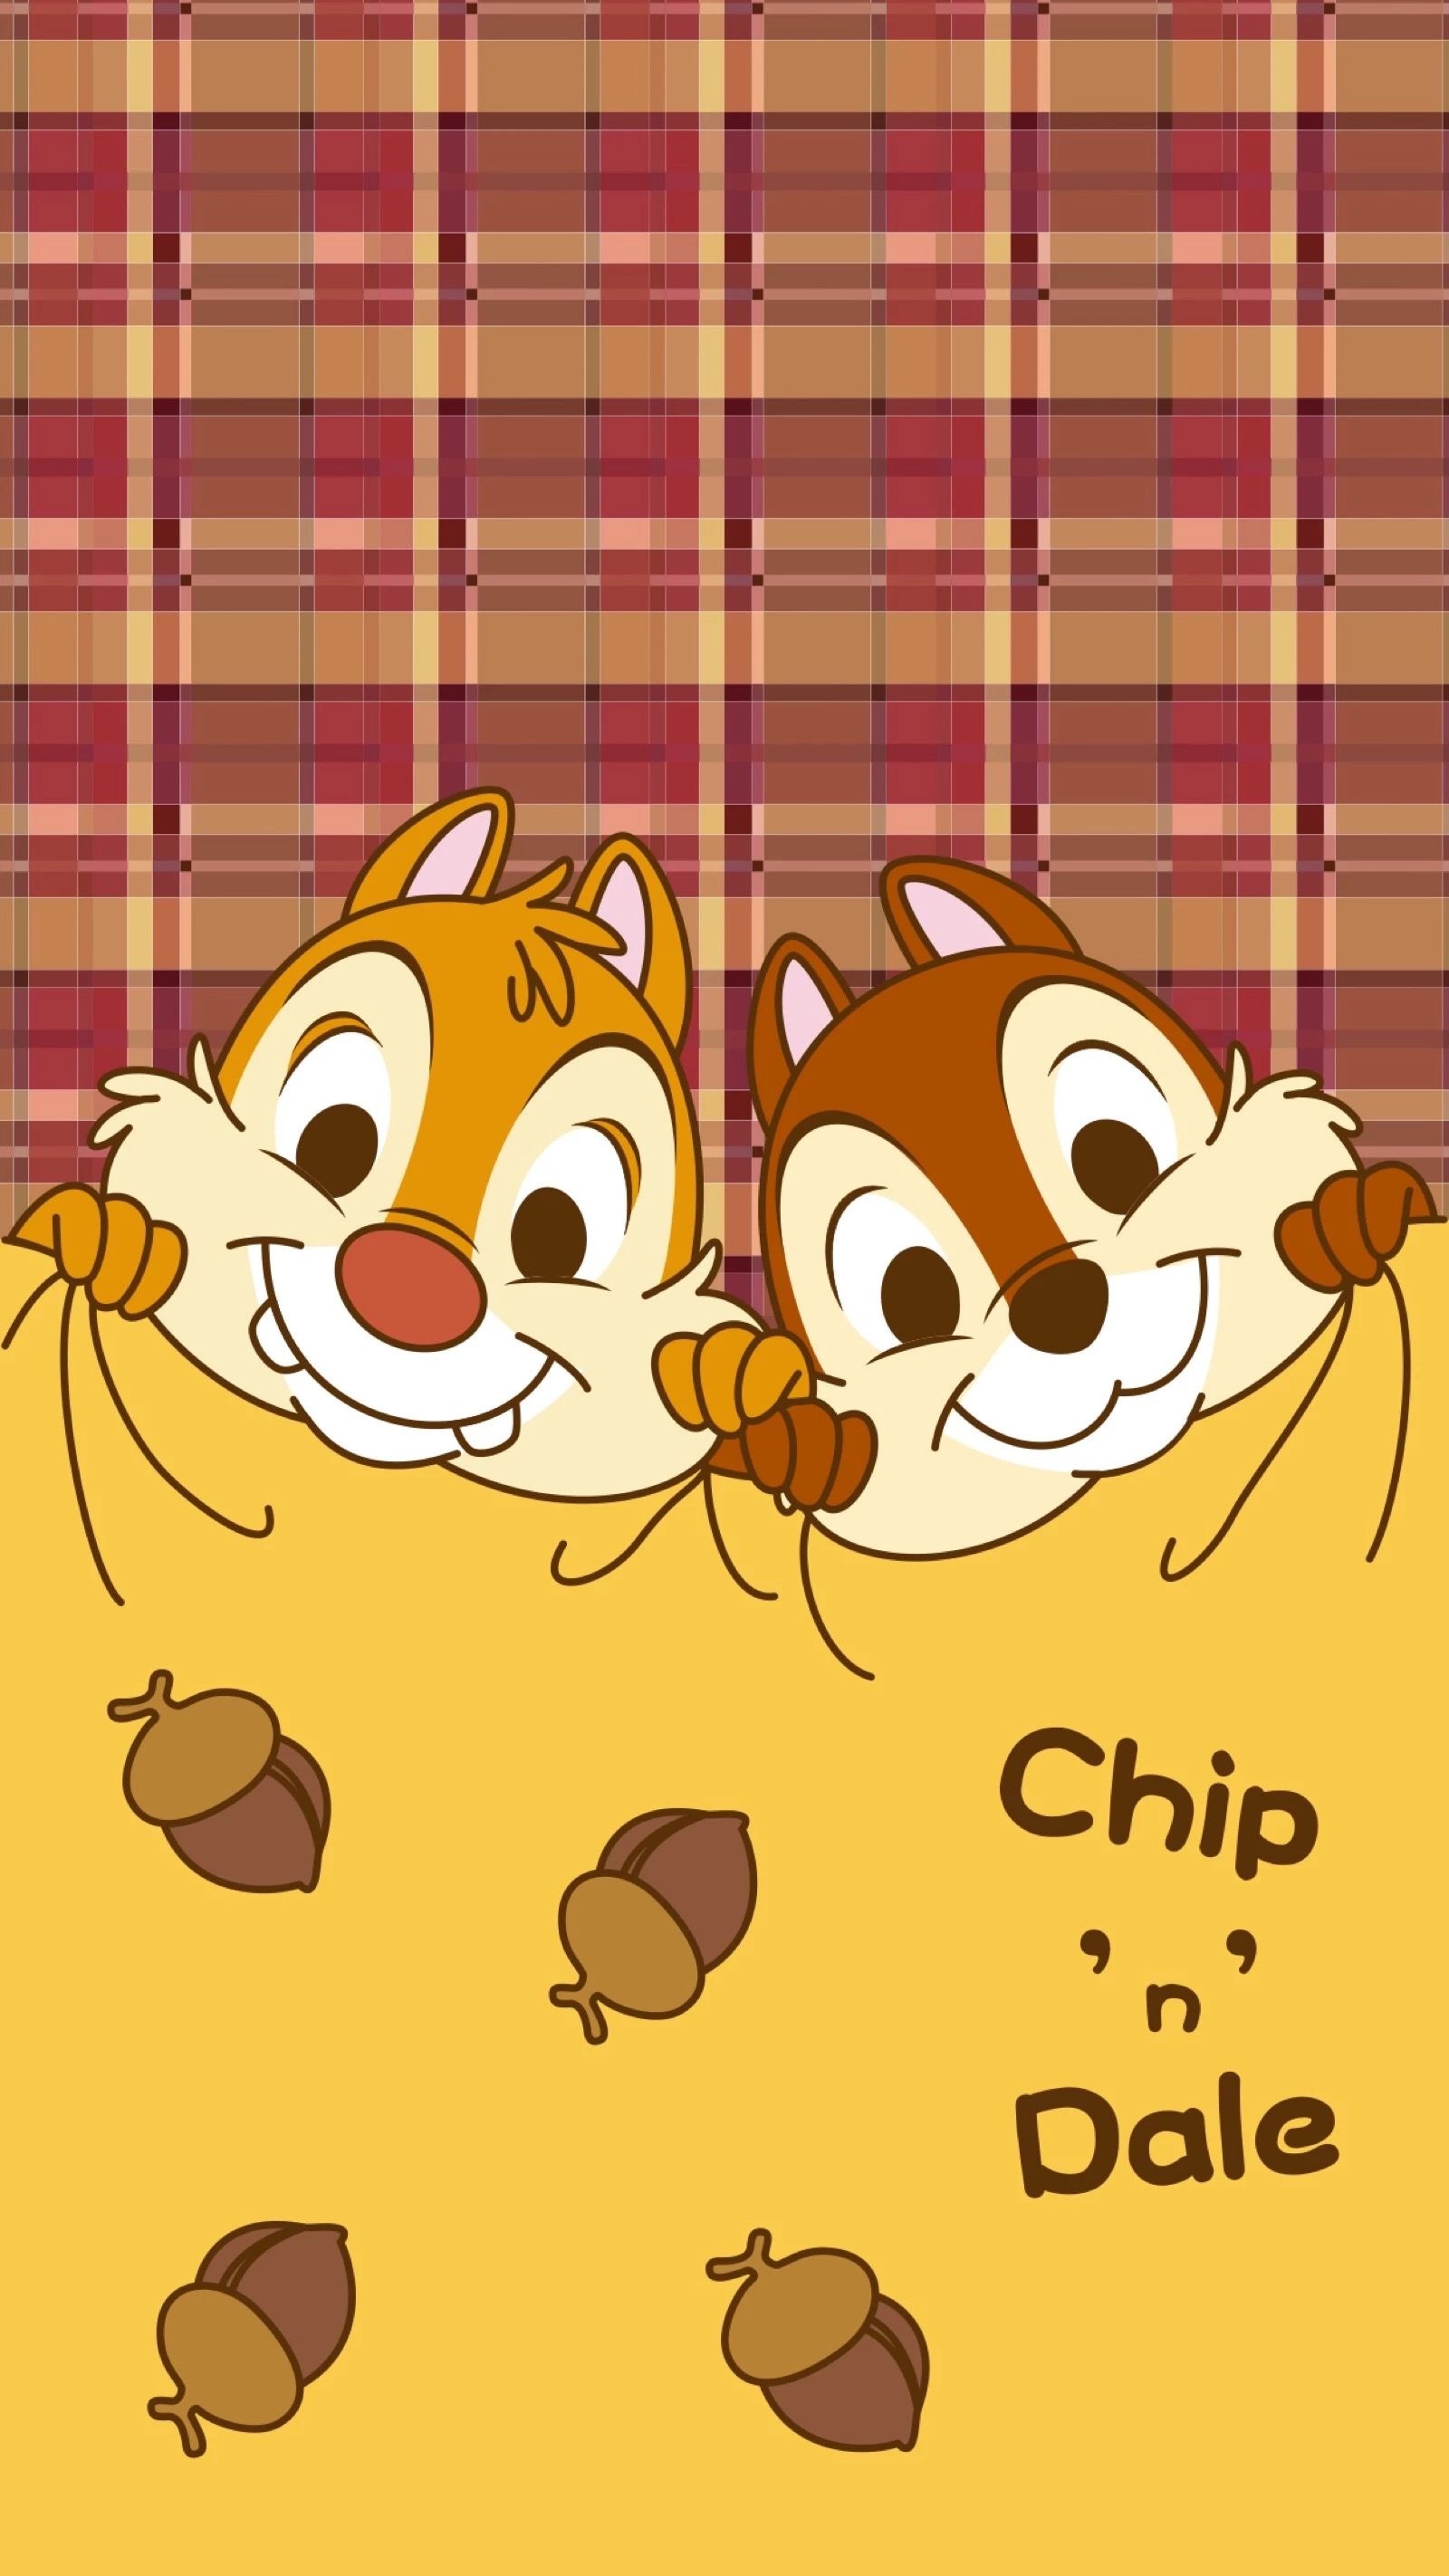 Chip 'n' Dale: Rescue Rangers, Playful wallpapers, Cartoonish charm, Disney animated series, 1600x2850 HD Handy